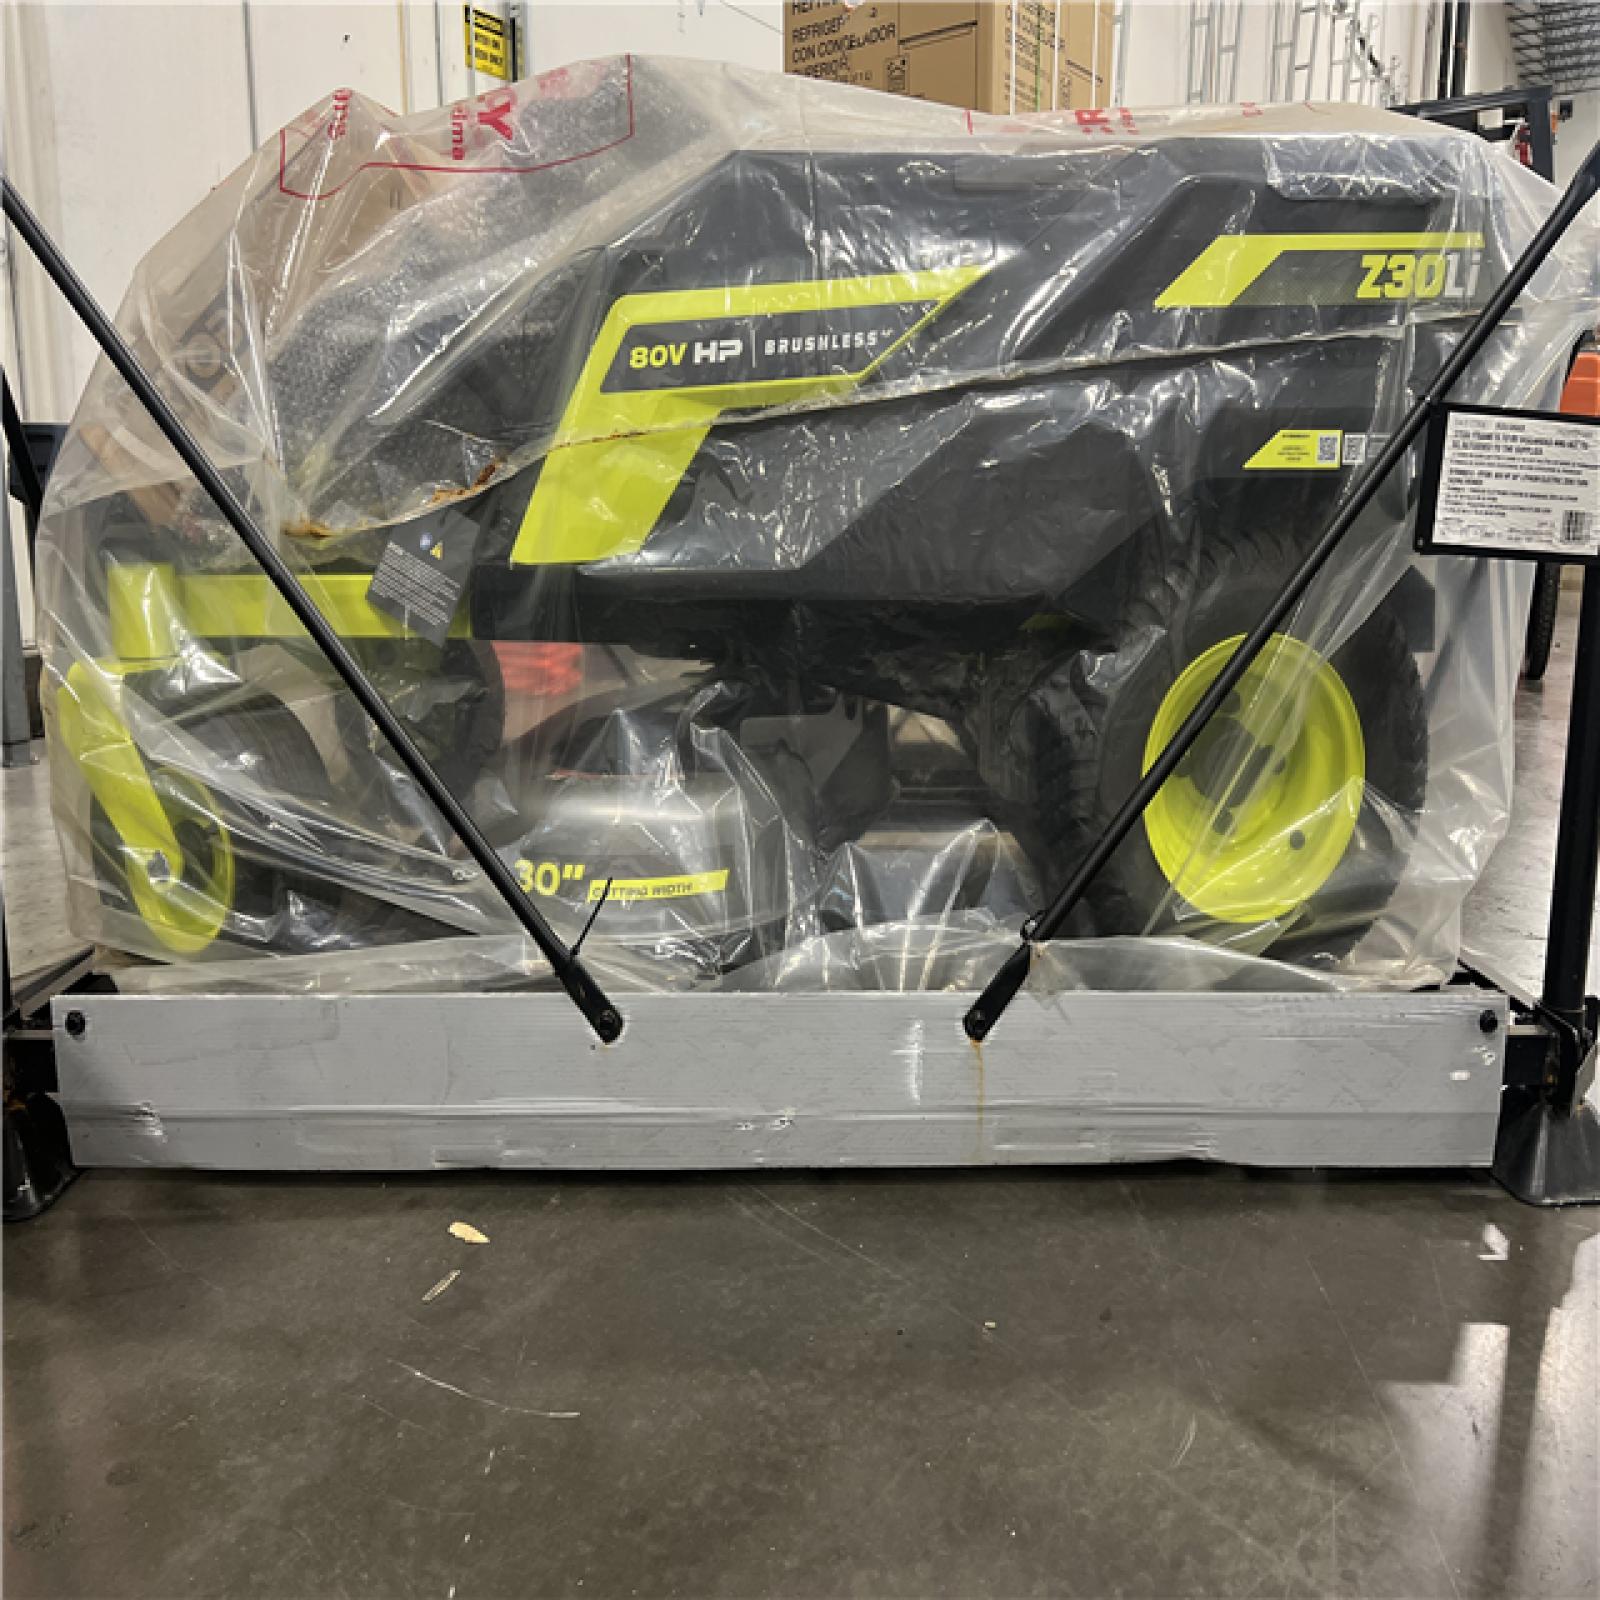 DALLAS LOCATION - RYOBI 80V HP Brushless 30 in. Battery Electric Cordless Zero Turn Riding Mower with (2) 80V 10 Ah Batteries and Charger